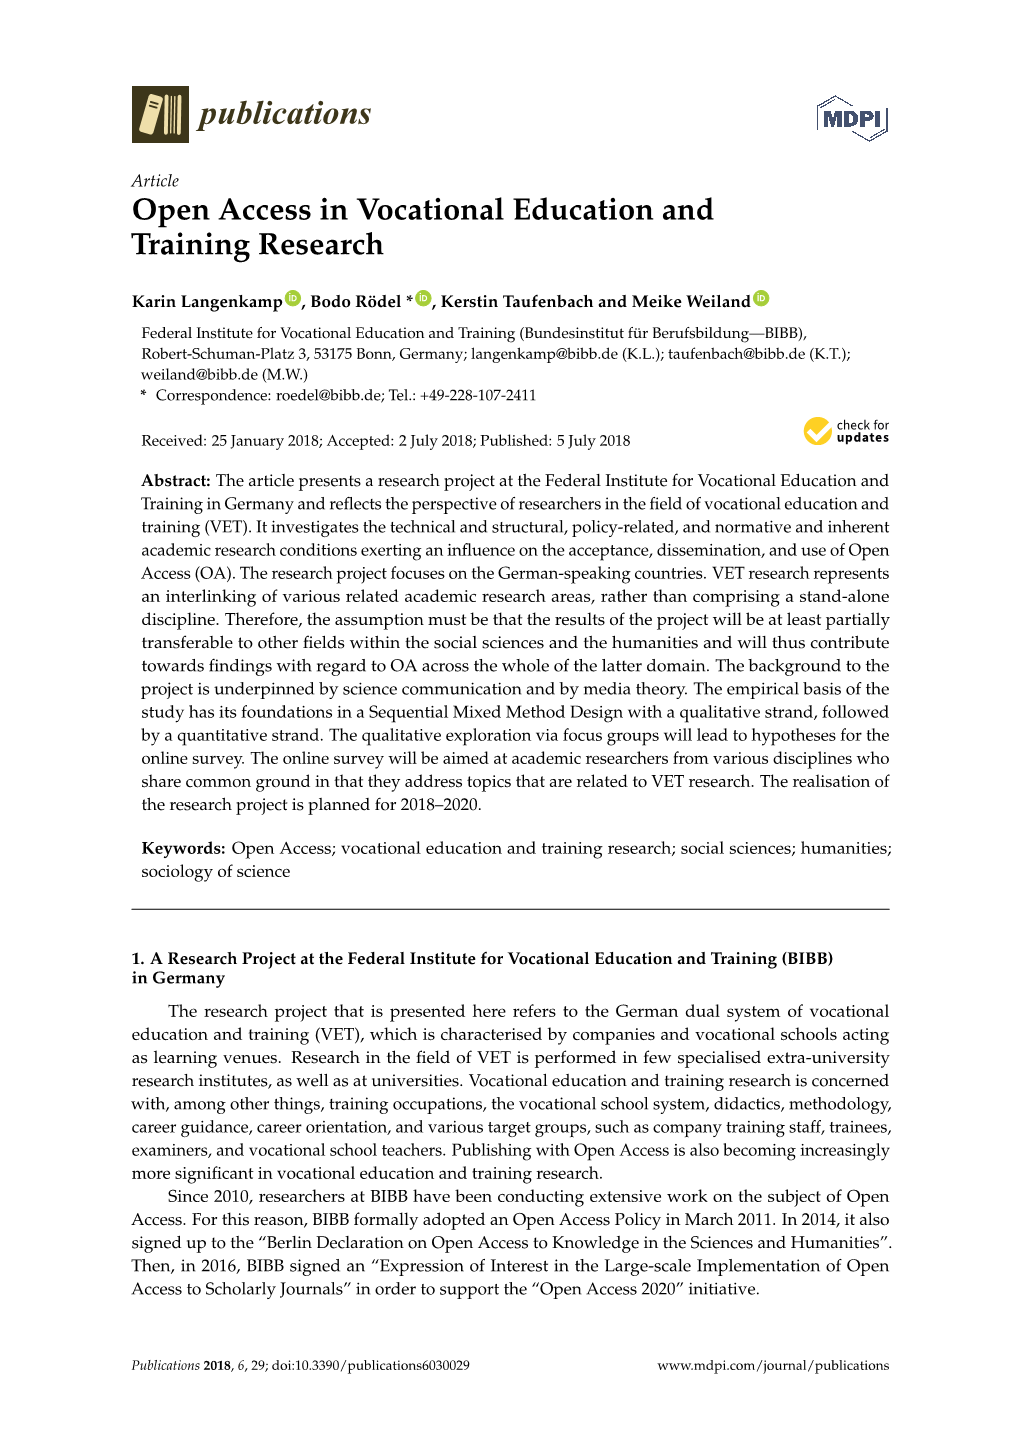 Open Access in Vocational Education and Training Research